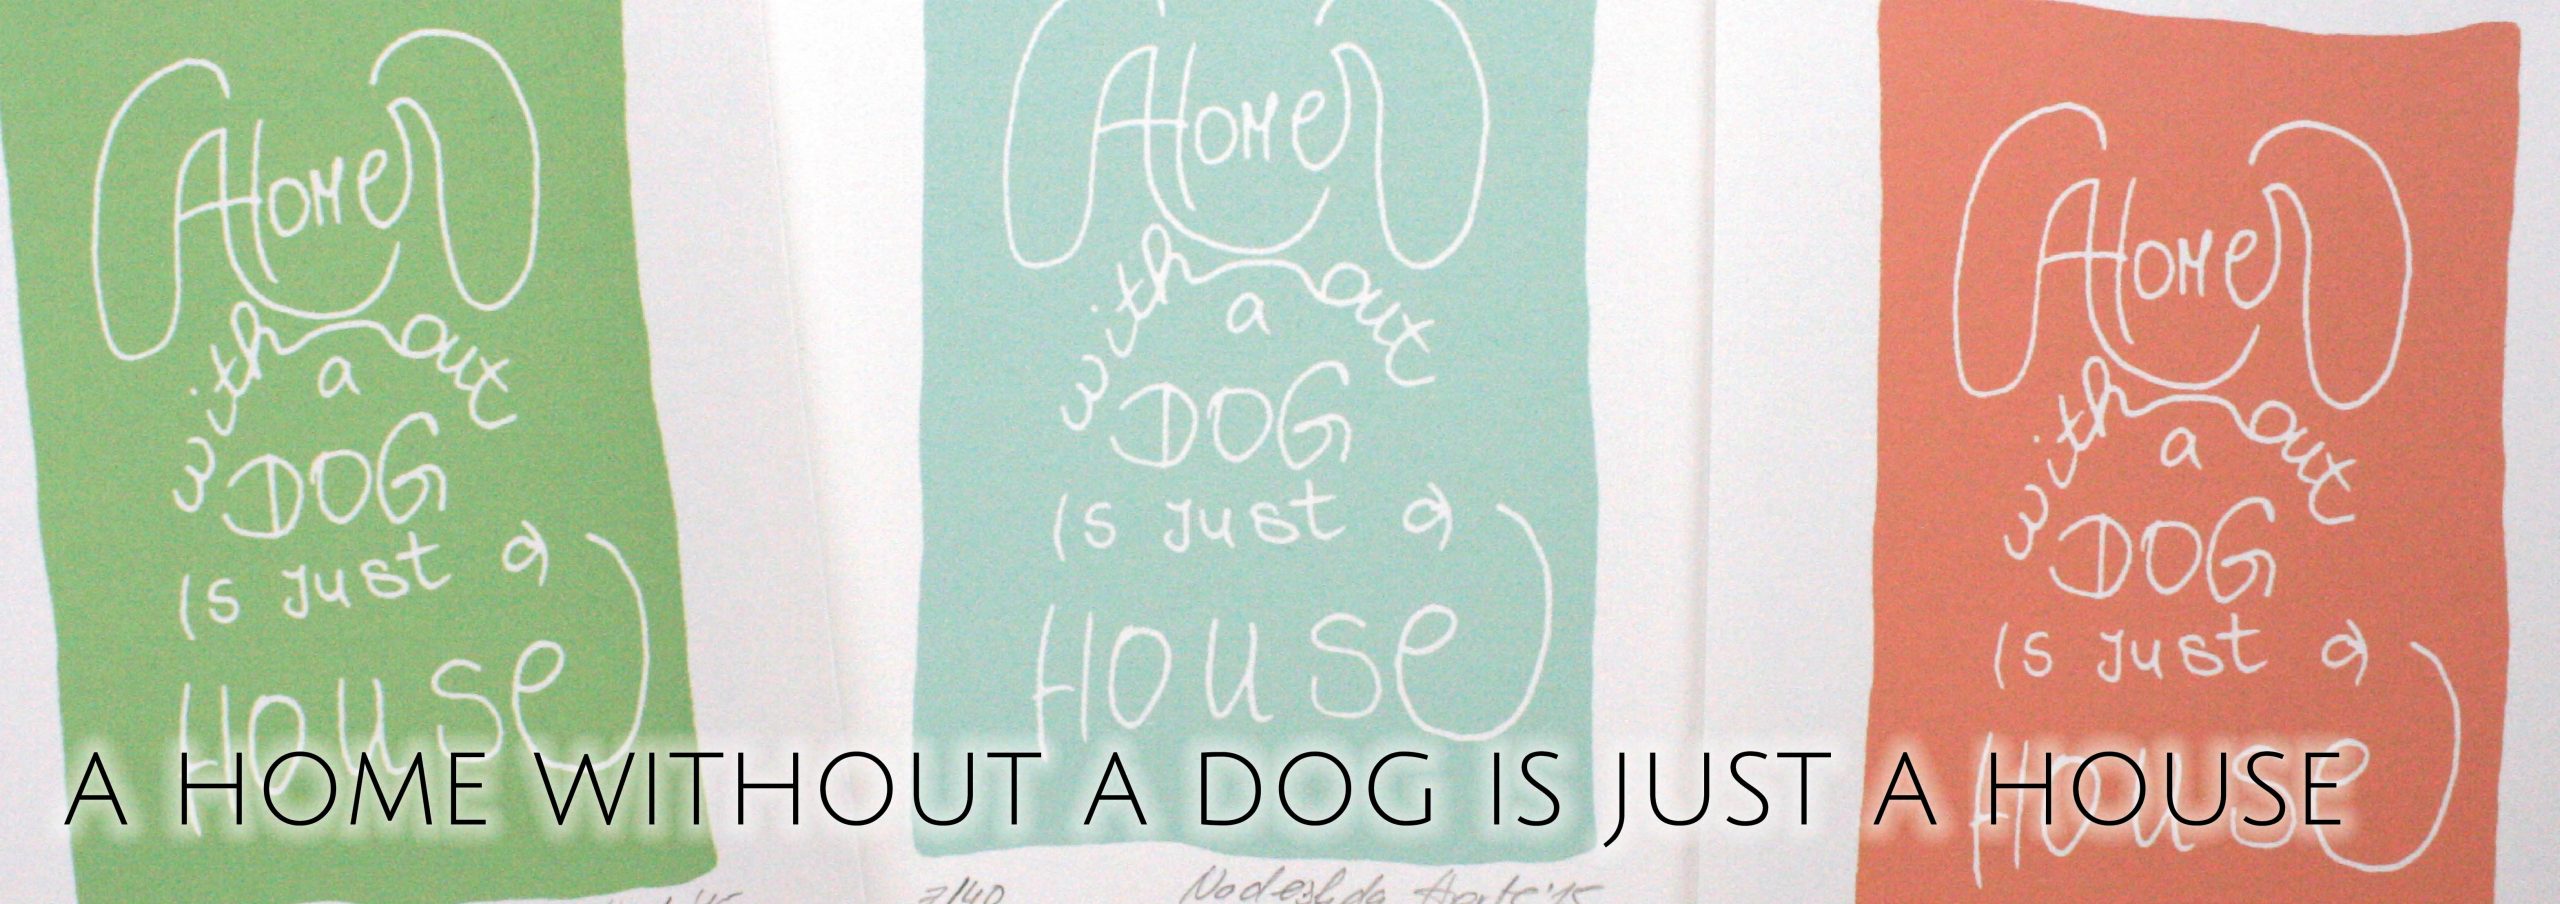 A home without a dog is just a house